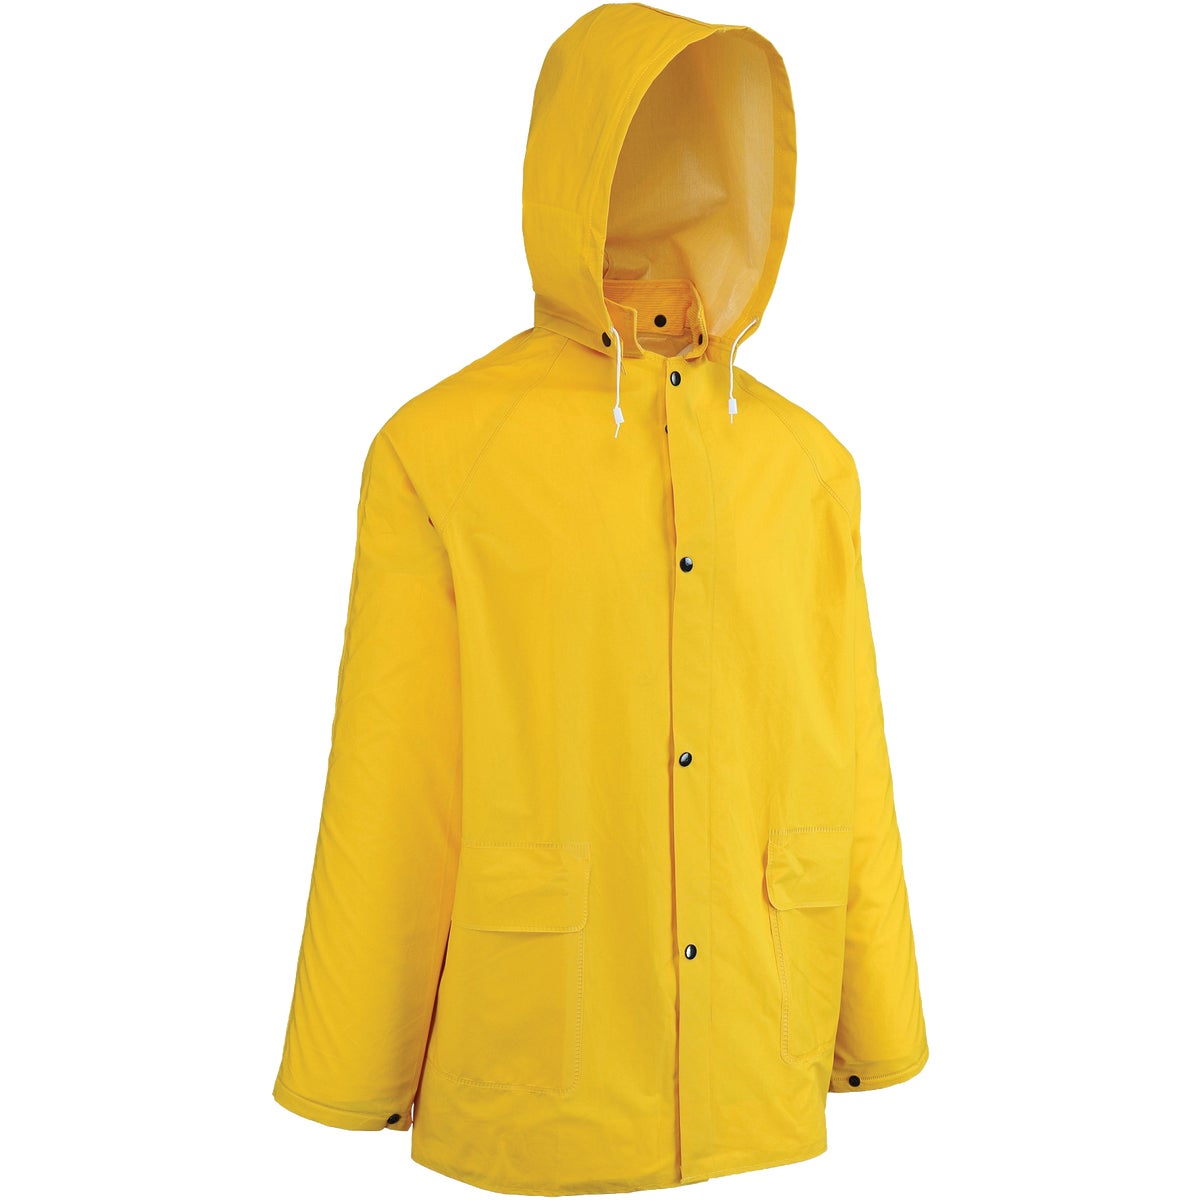 West Chester Protective Gear Large Yellow PVC Rain Coat